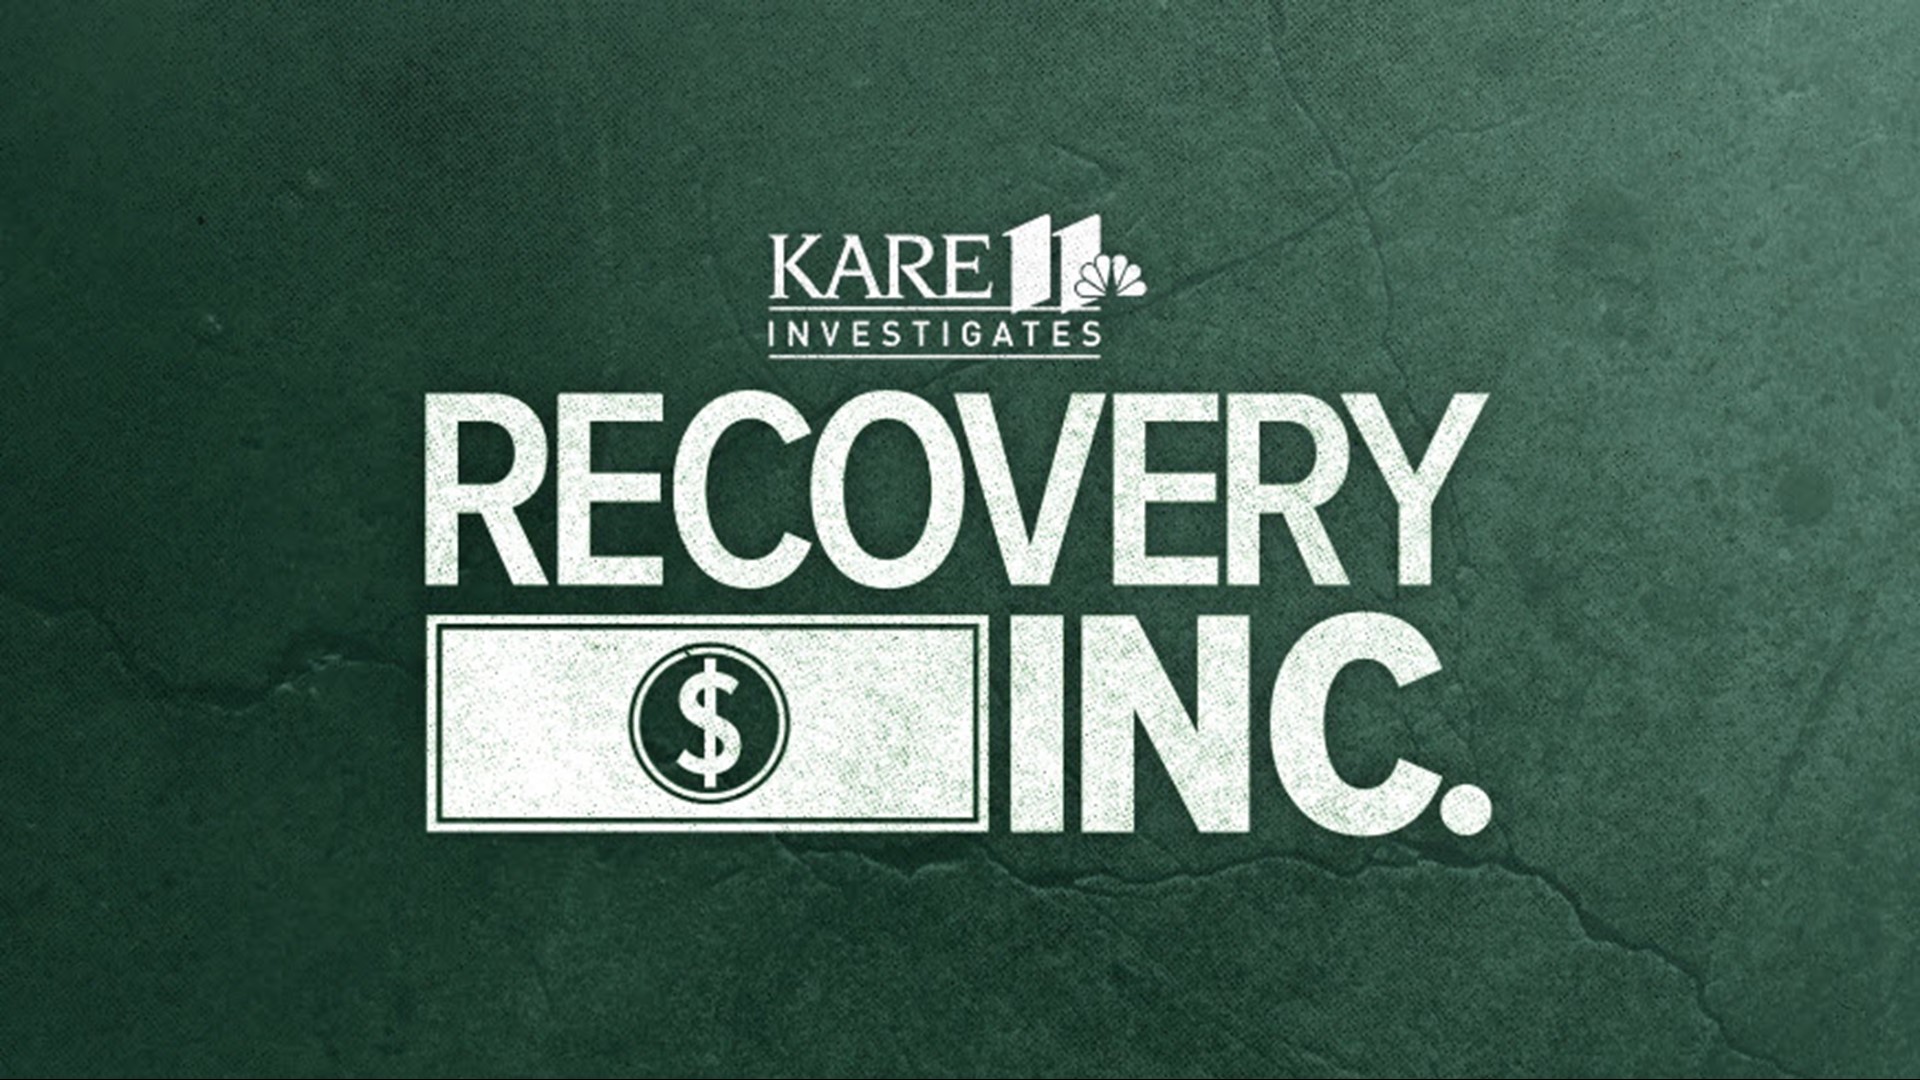 New tax filings obtained by KARE 11 raise “red flags” about taxpayer-funded payments for addiction recovery services.